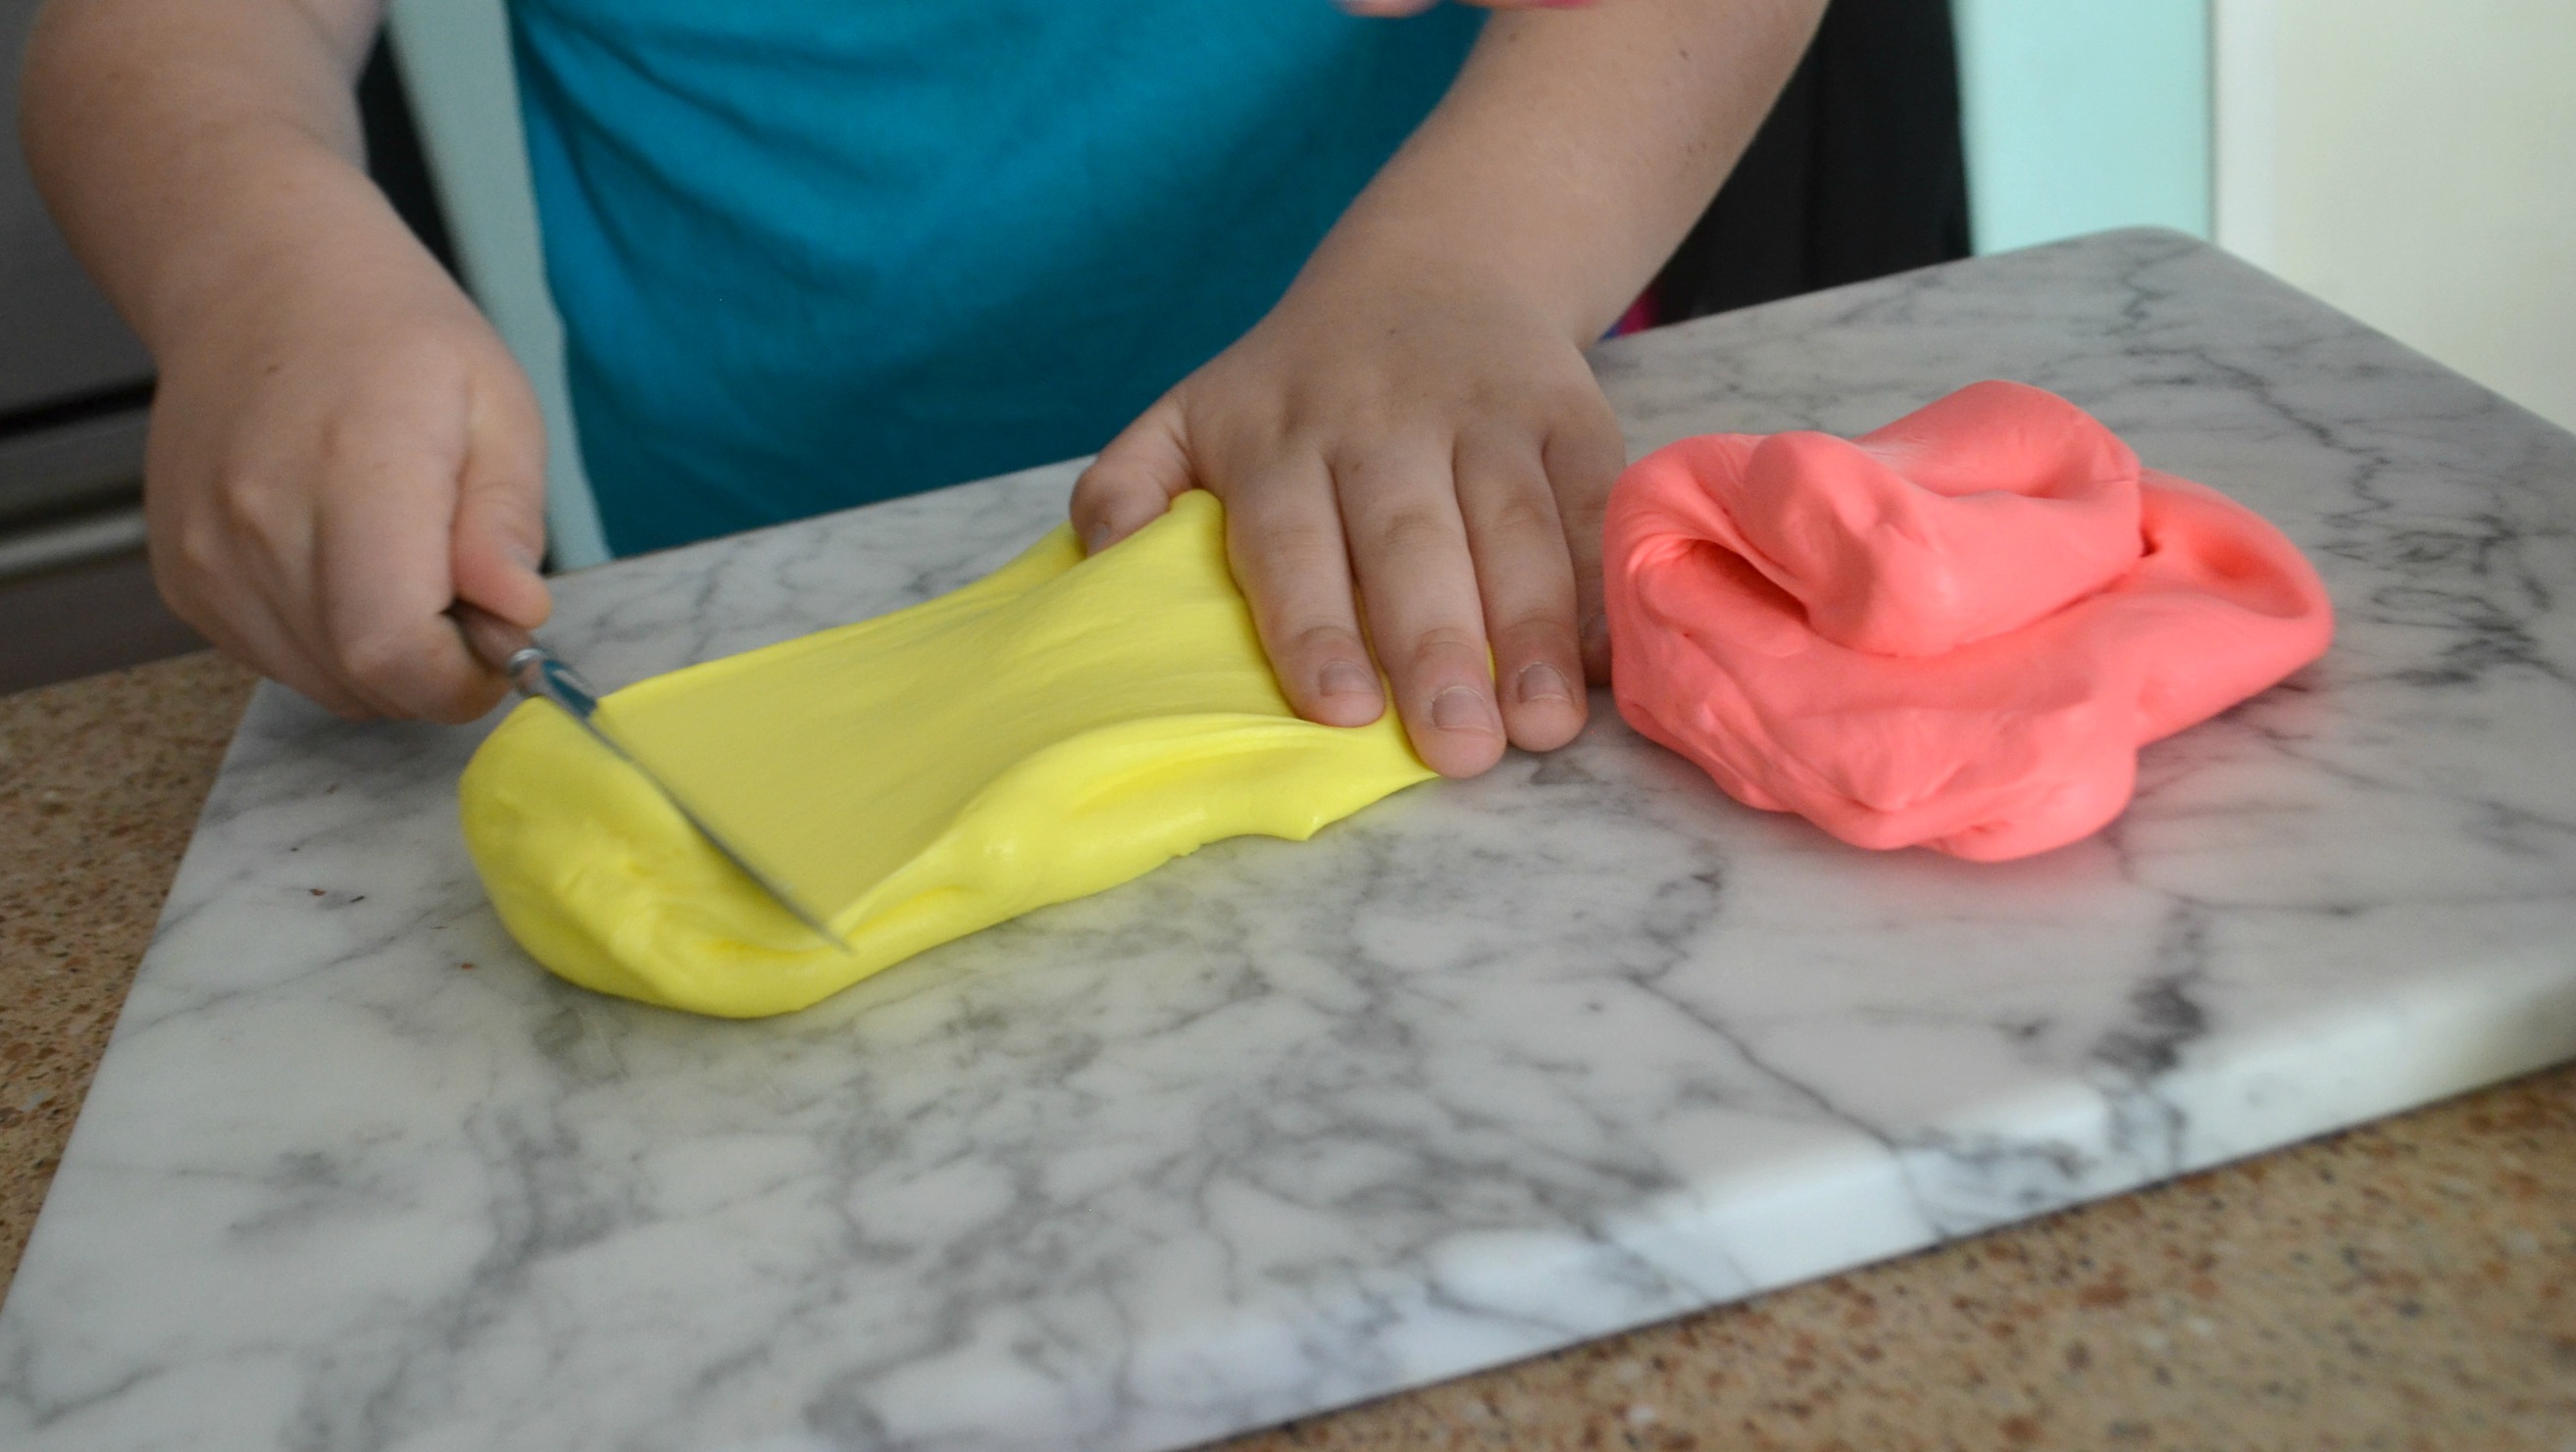 Make diy butter slime using clay – Two examples of the slime